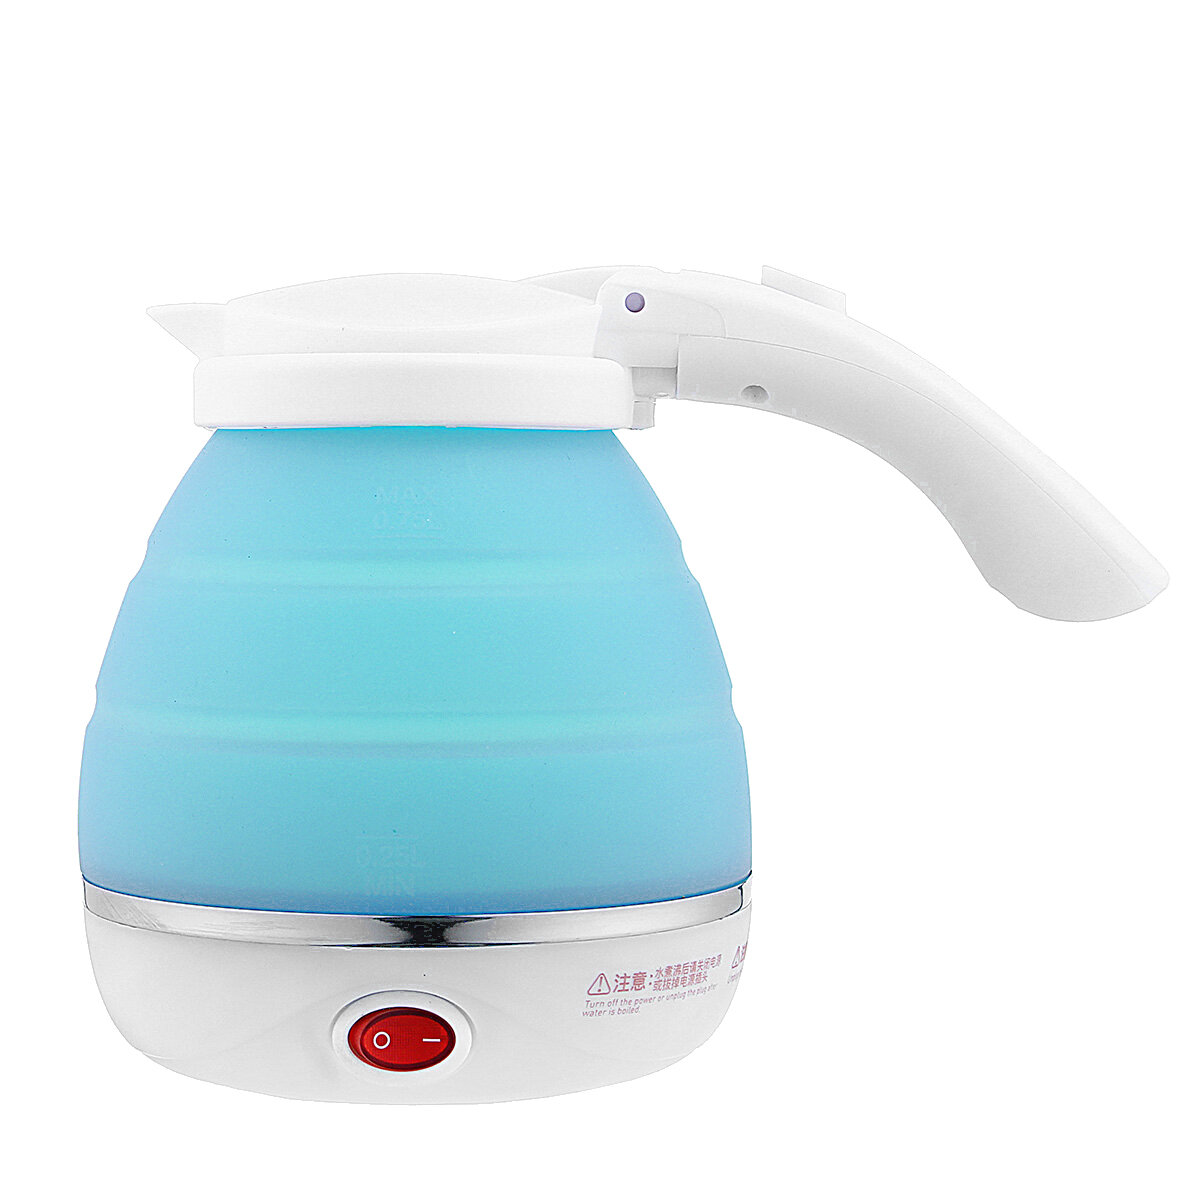 SE Collapsible Silicone Kettle